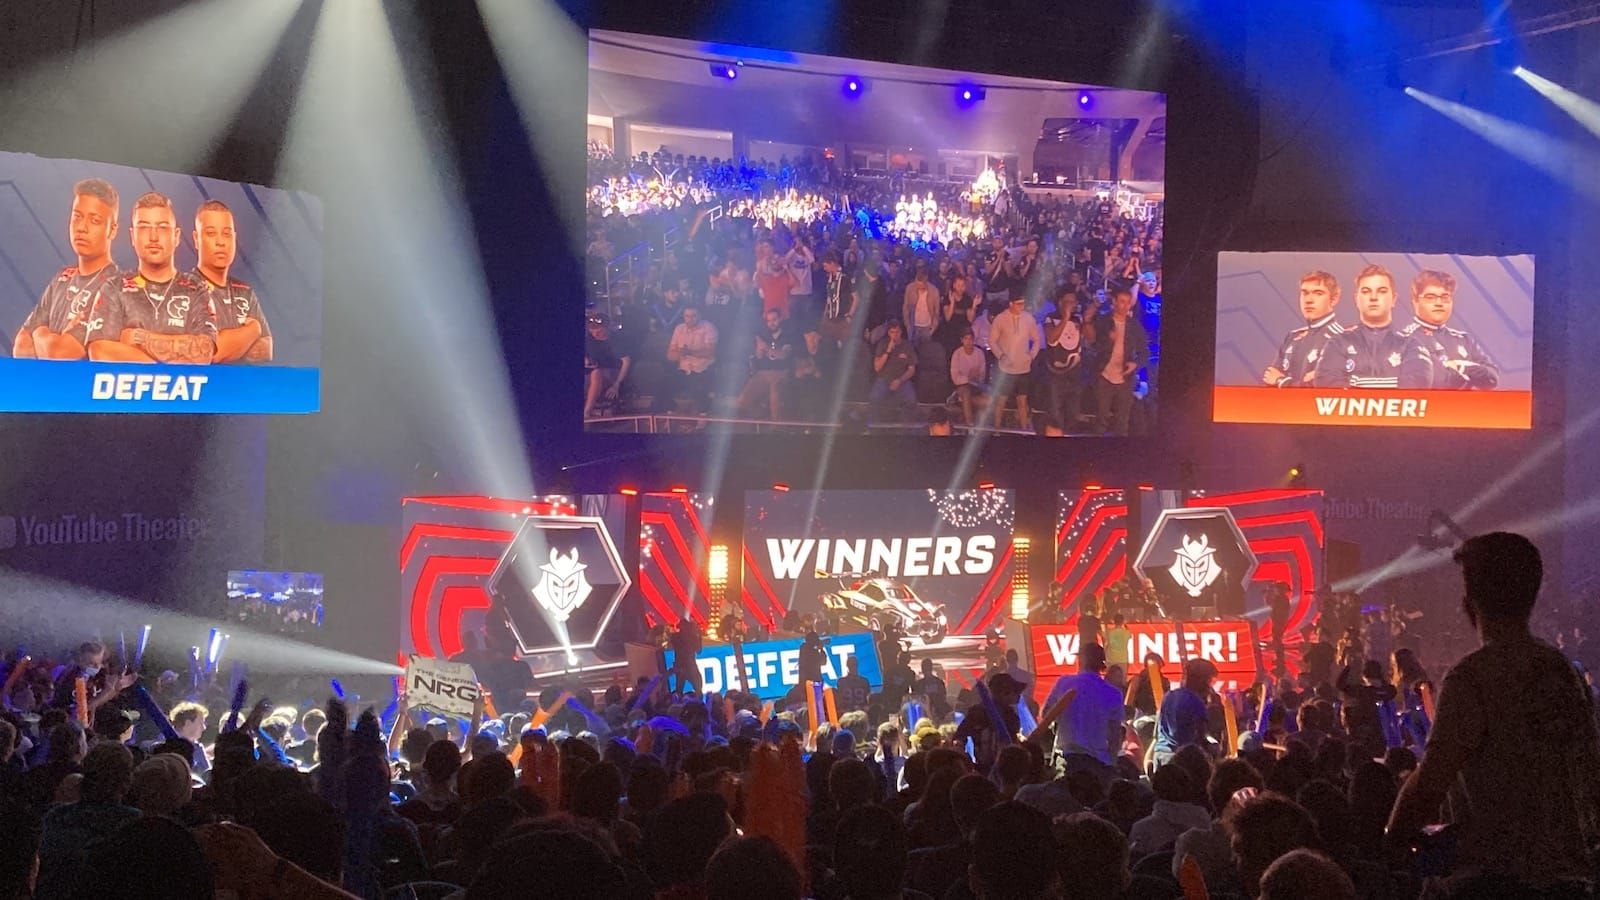 View of the stage from the crowd at a Rocket League tournament as G2 has just picked up a win